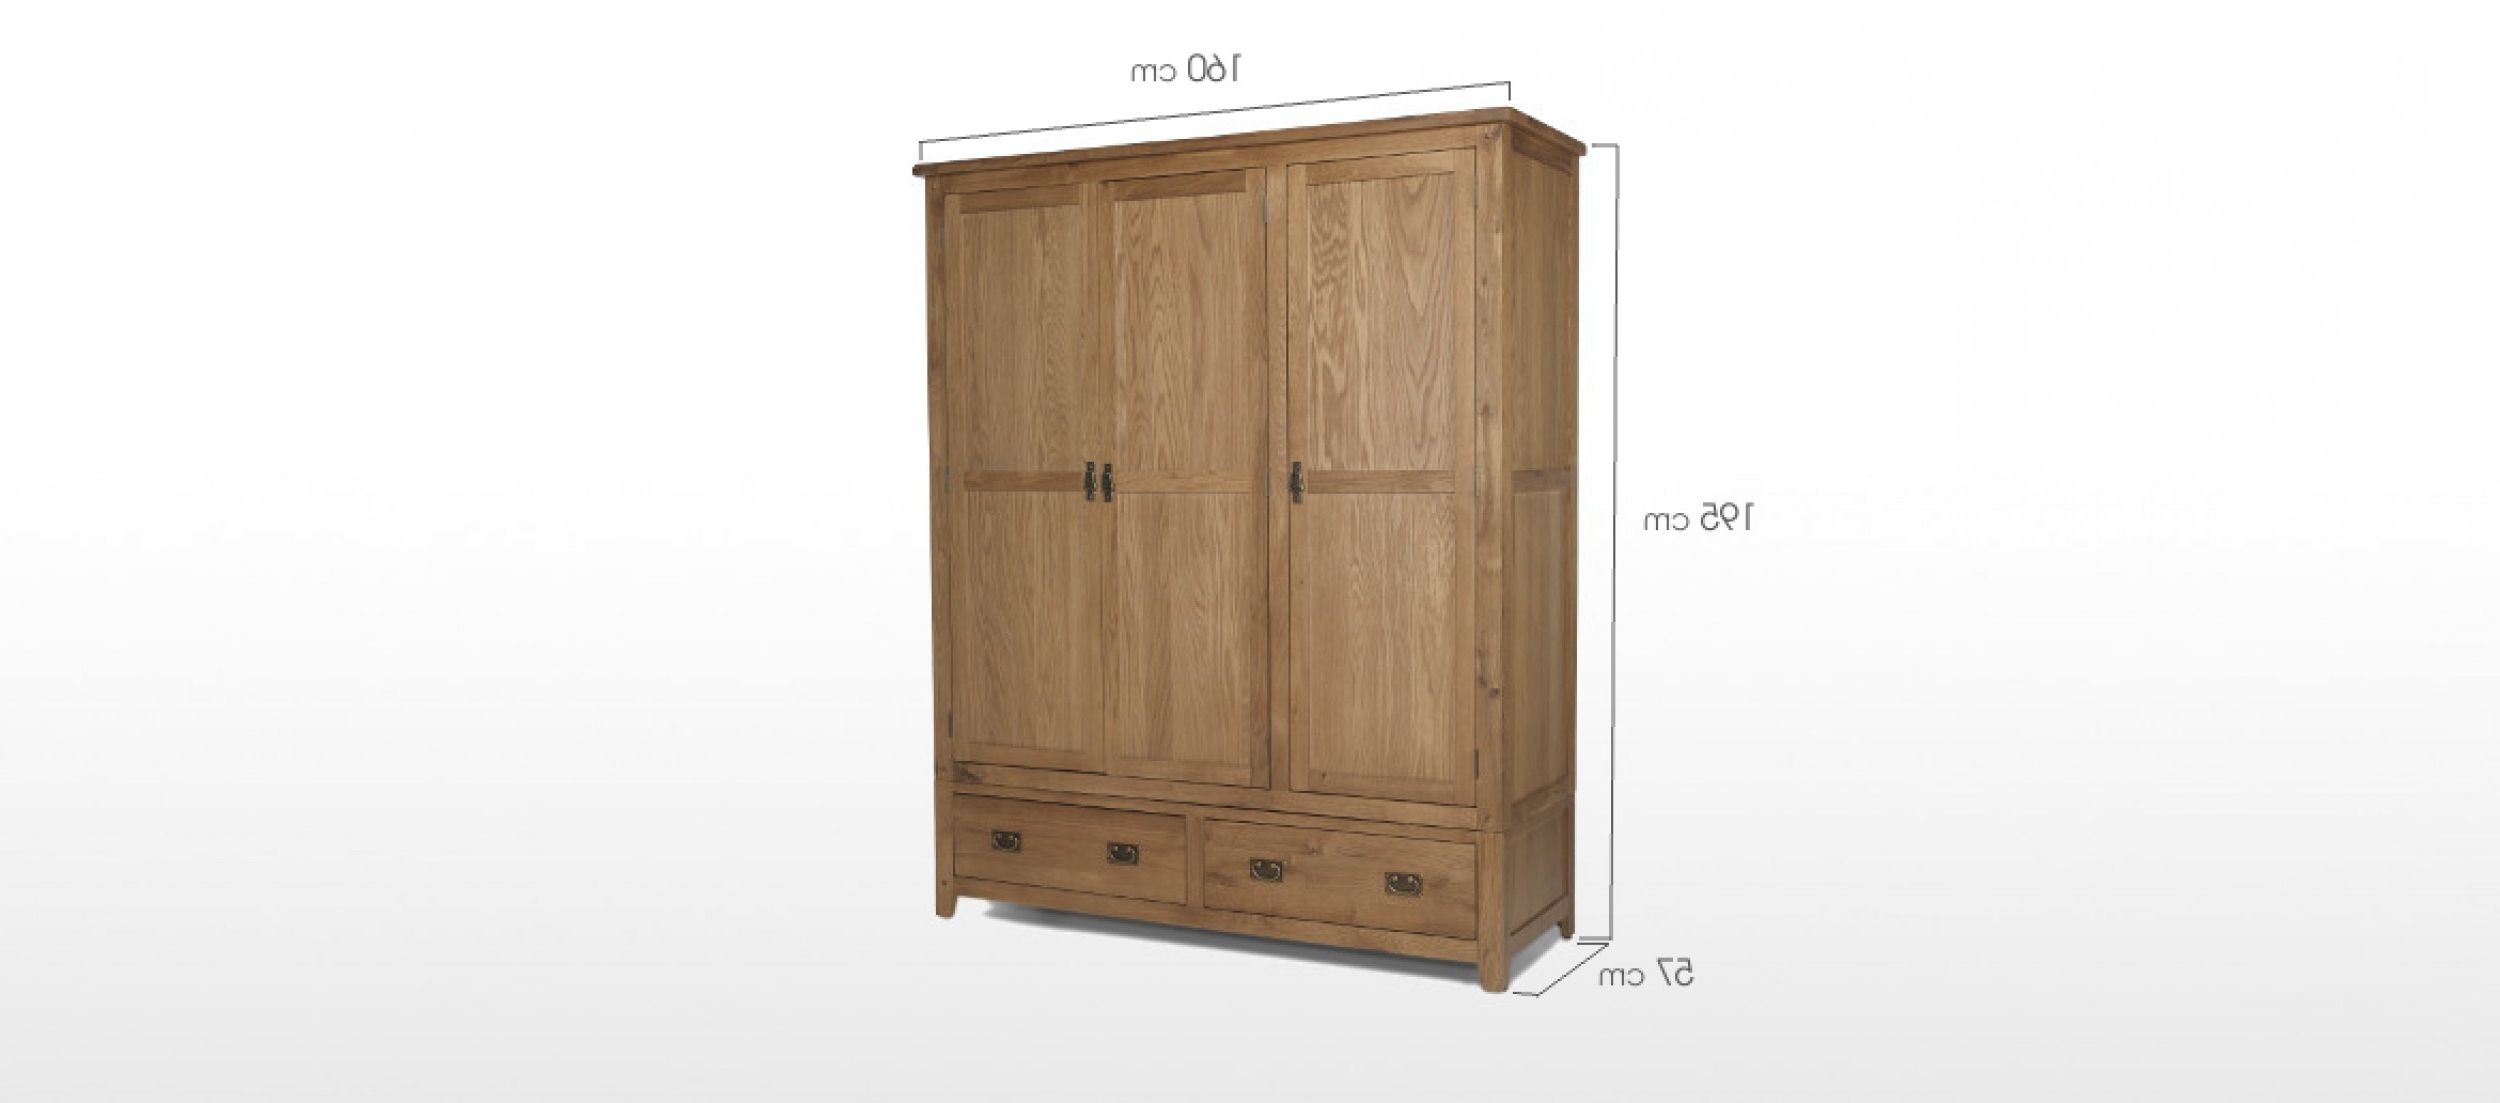 Narrow Wardrobe With Drawers Single Pine Tall Solid Wood This Is Throughout Most Recent Single Pine Wardrobes With Drawers (View 4 of 15)